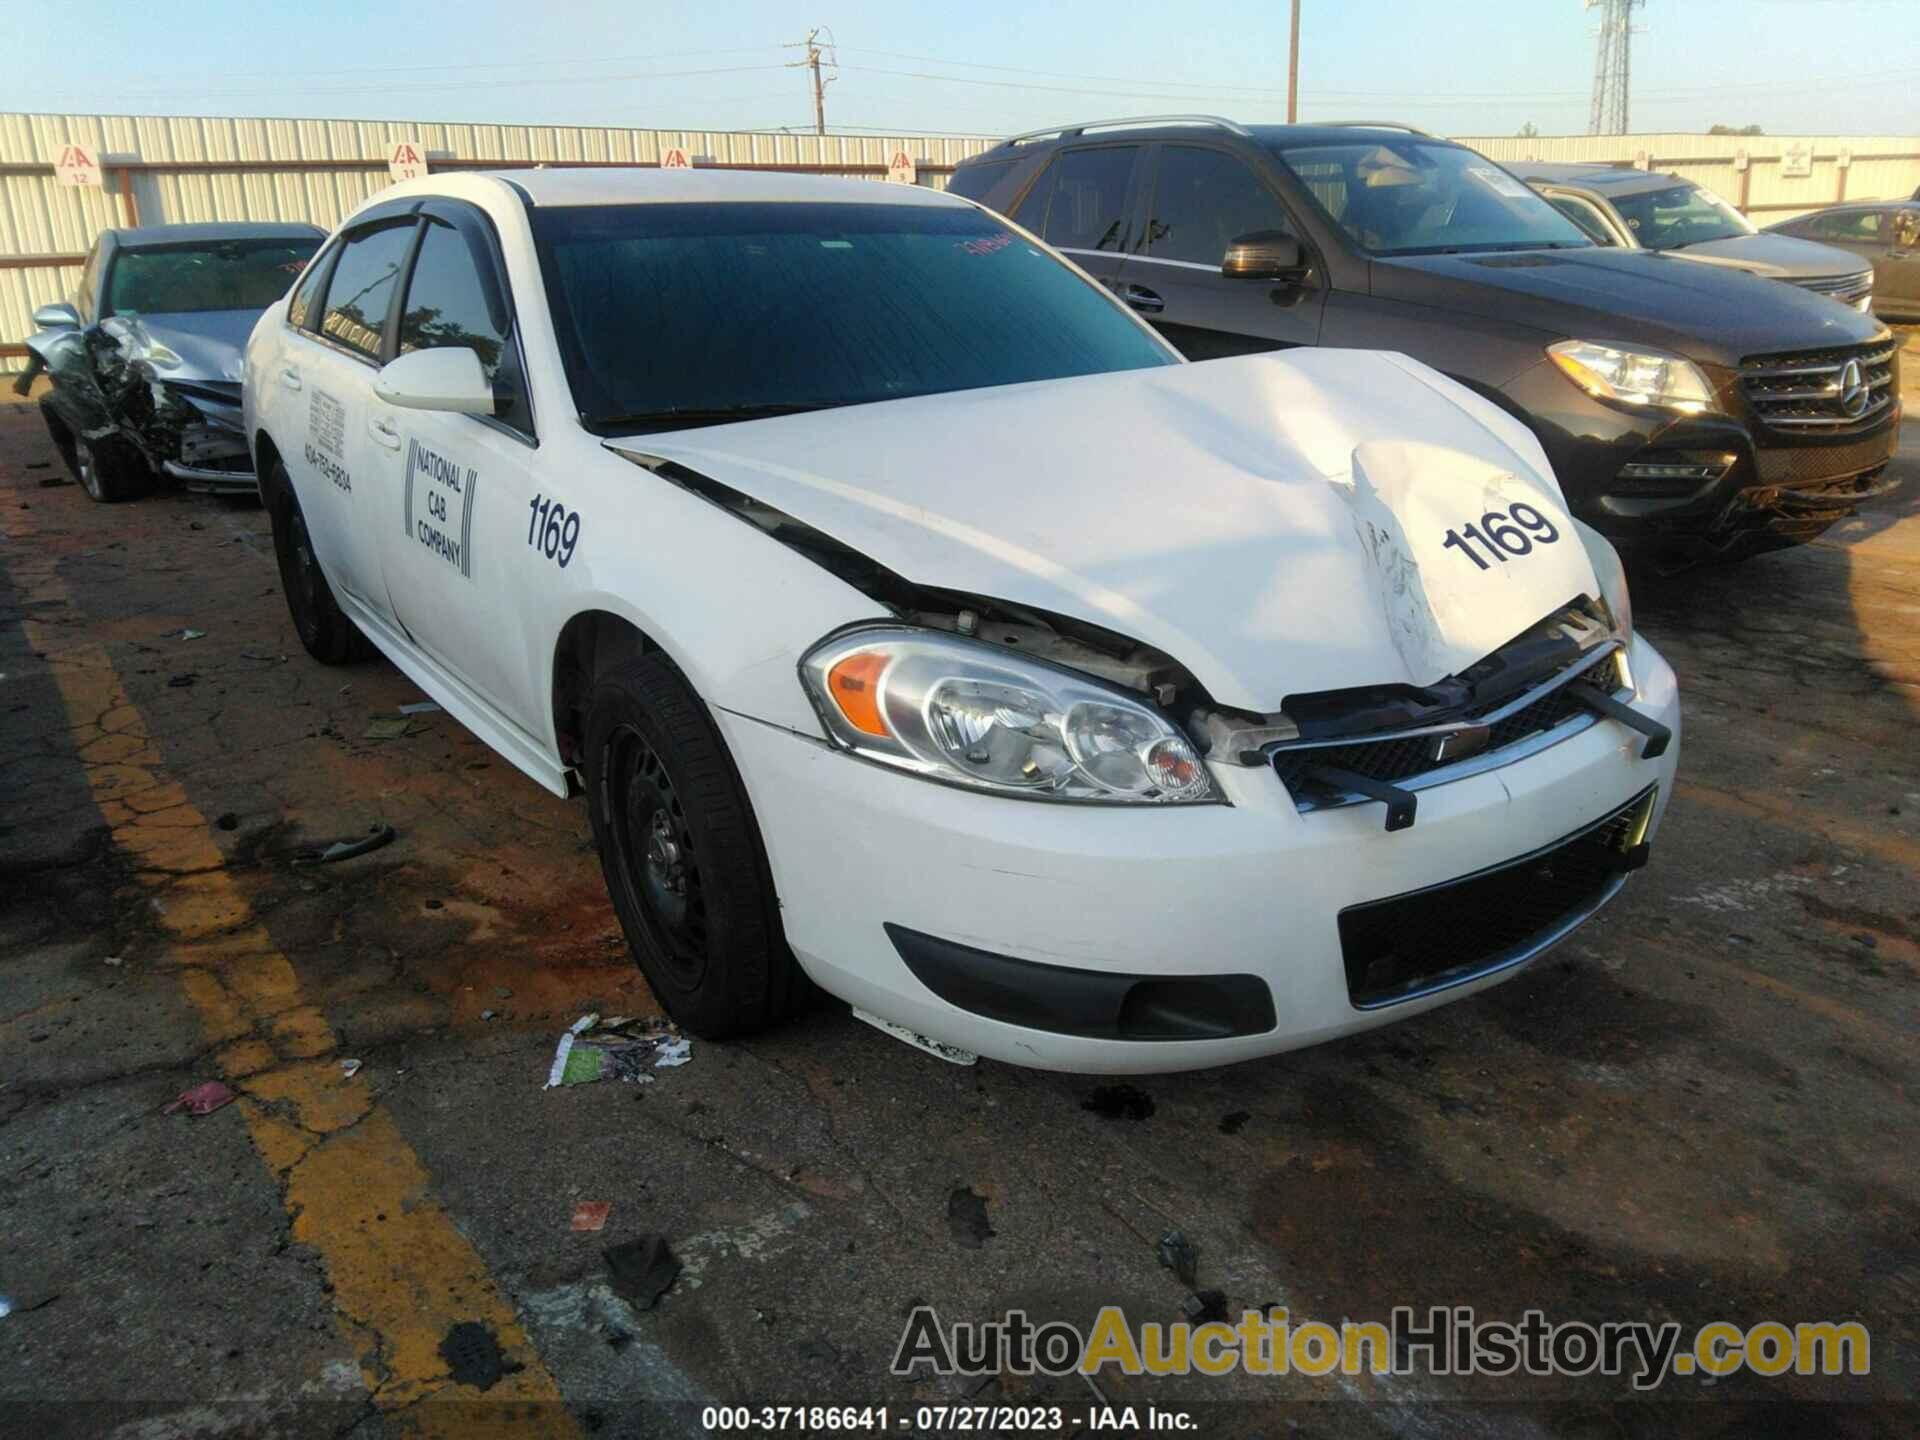 CHEVROLET IMPALA LIMITED POLICE POLICE, 2G1WD5E32G1131064